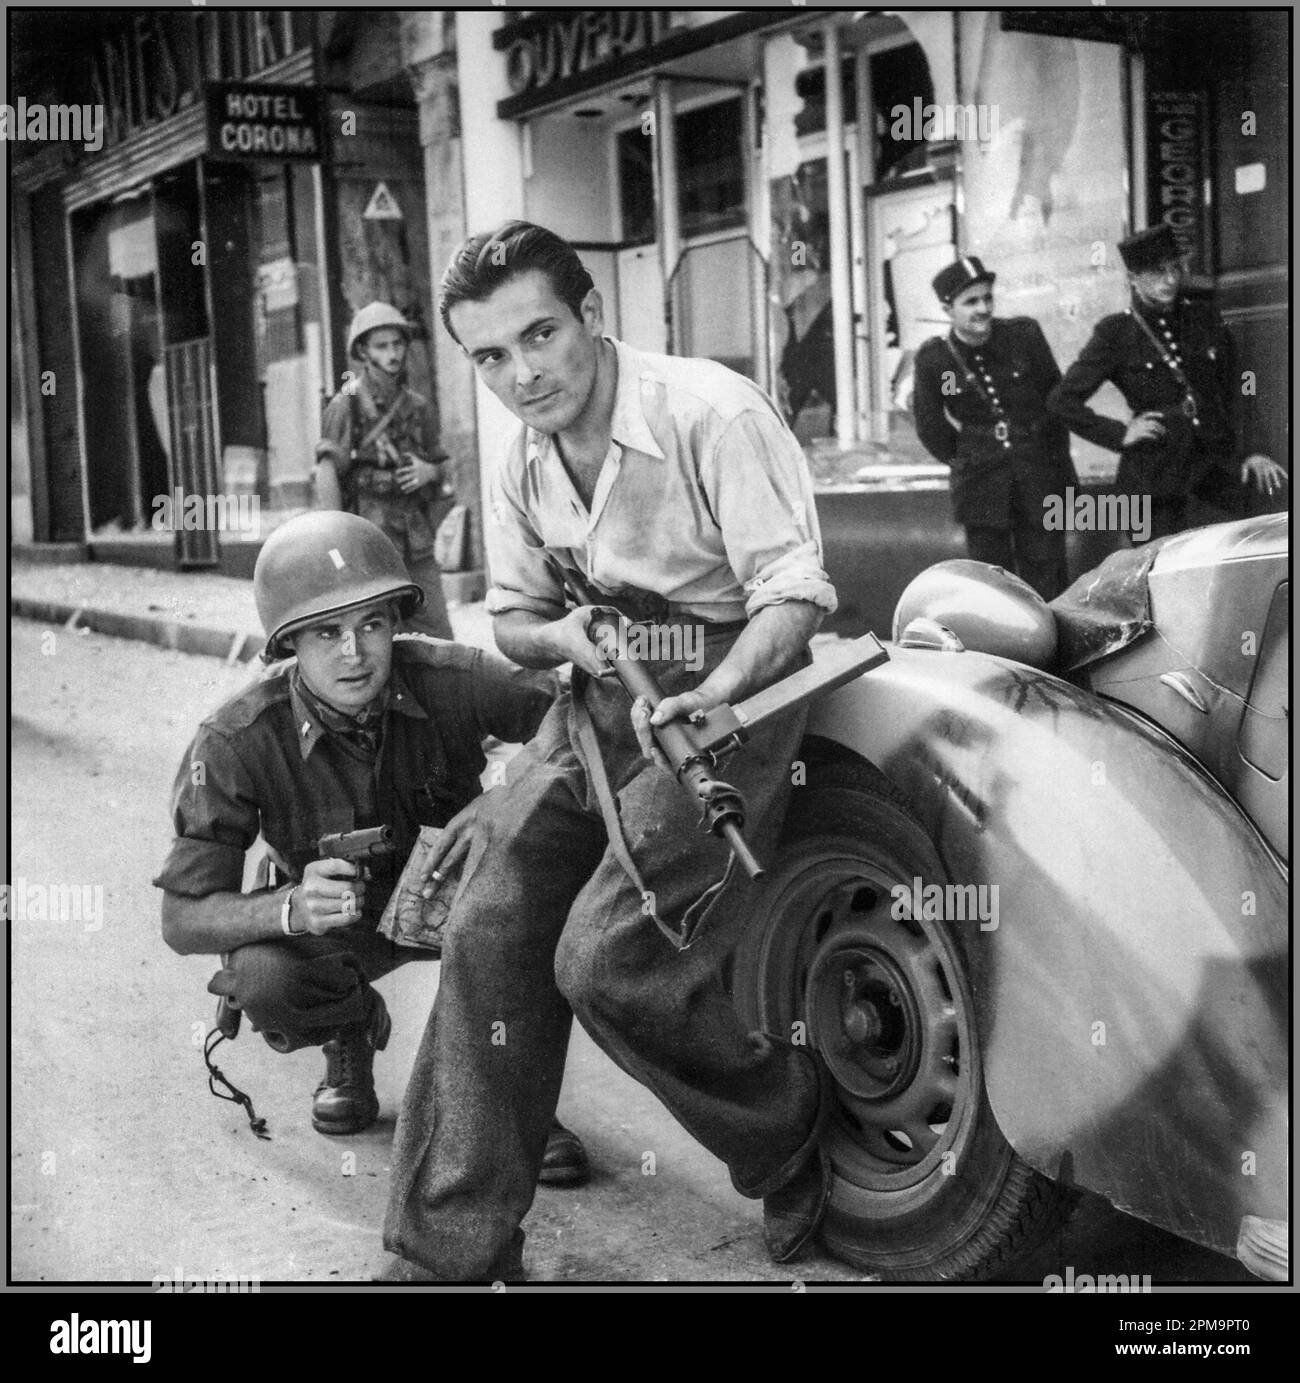 FRENCH RESISTANCE PARTISAN 1944 MARSEILLE WW2 American Lieutenant Edwin E. Dowell with a Colt pistol and a French partisan with an English-made submachine gun during a street battle in Marseille. France. Noteworthy are the police officers in the background and the camouflage coloring of the car. Marseille France.The French Resistance (French: La Résistance) was a collection of groups that fought the Nazi occupation of France and the collaborationist Vichy régime in France during the Second World War. Resistance cells were small groups of armed men and women called the Maquis in rural France Stock Photo